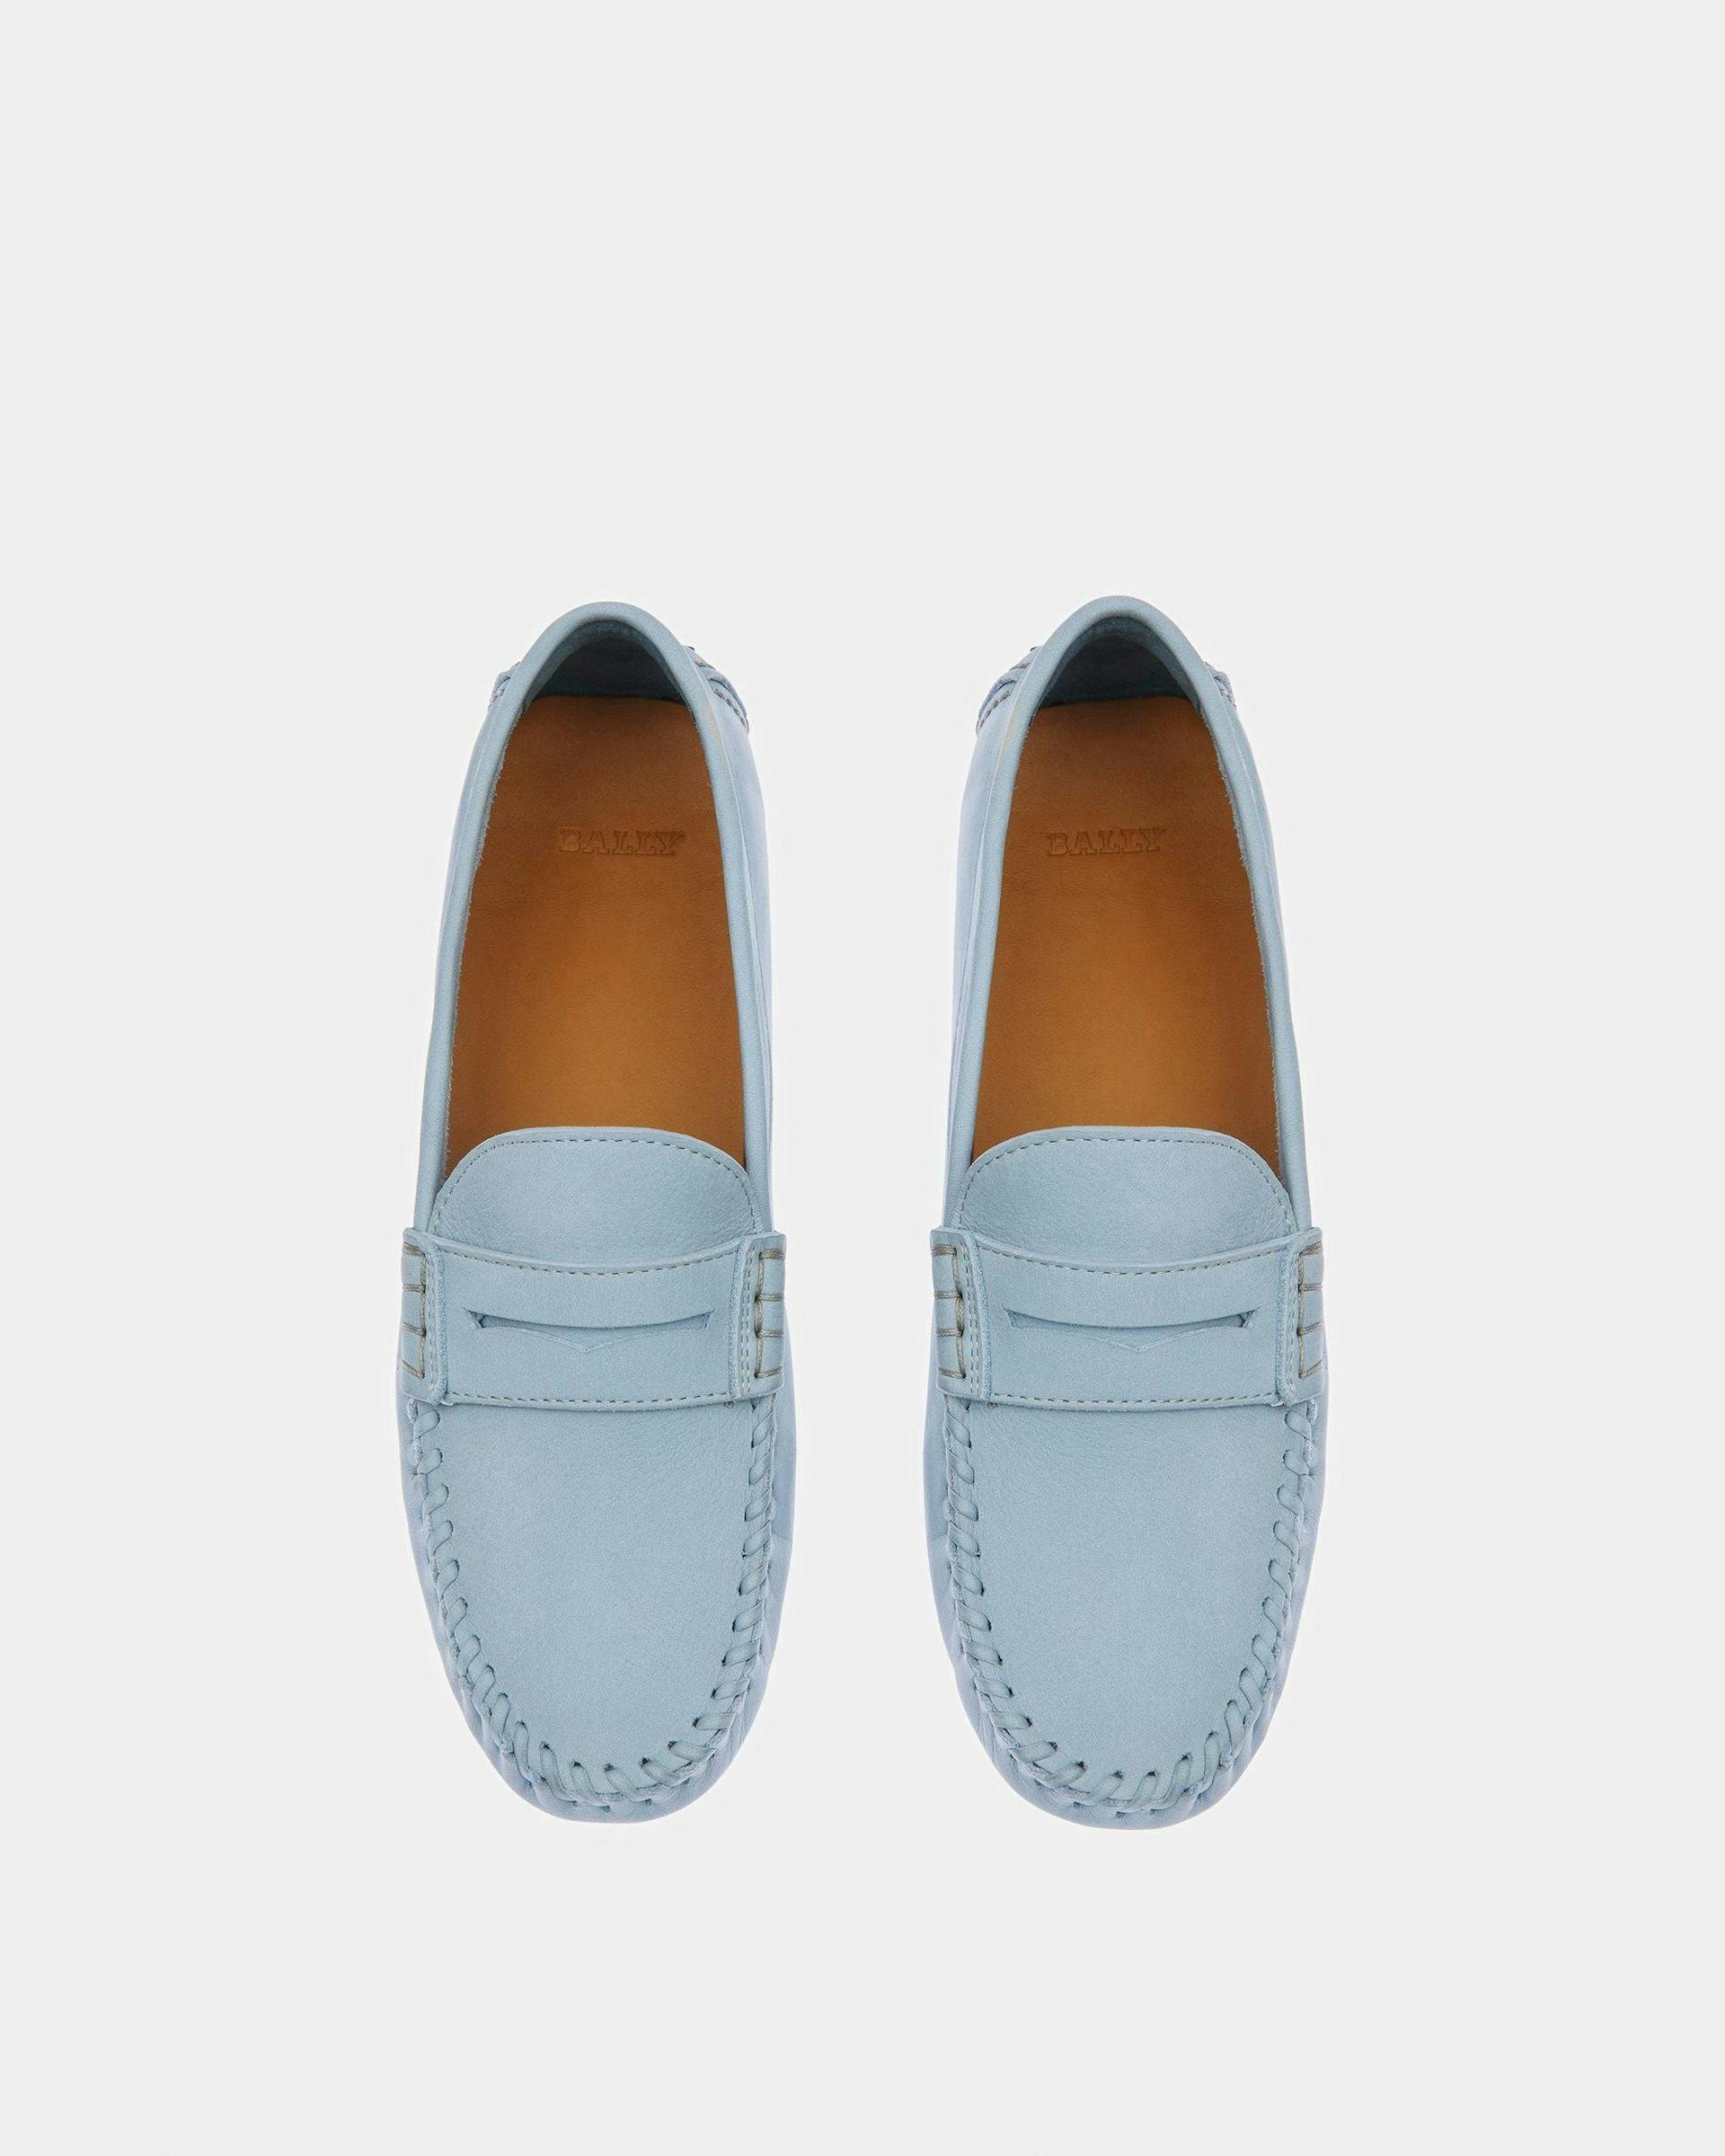 Lamby Leather Drivers In Light Blue - Women's - Bally - 02